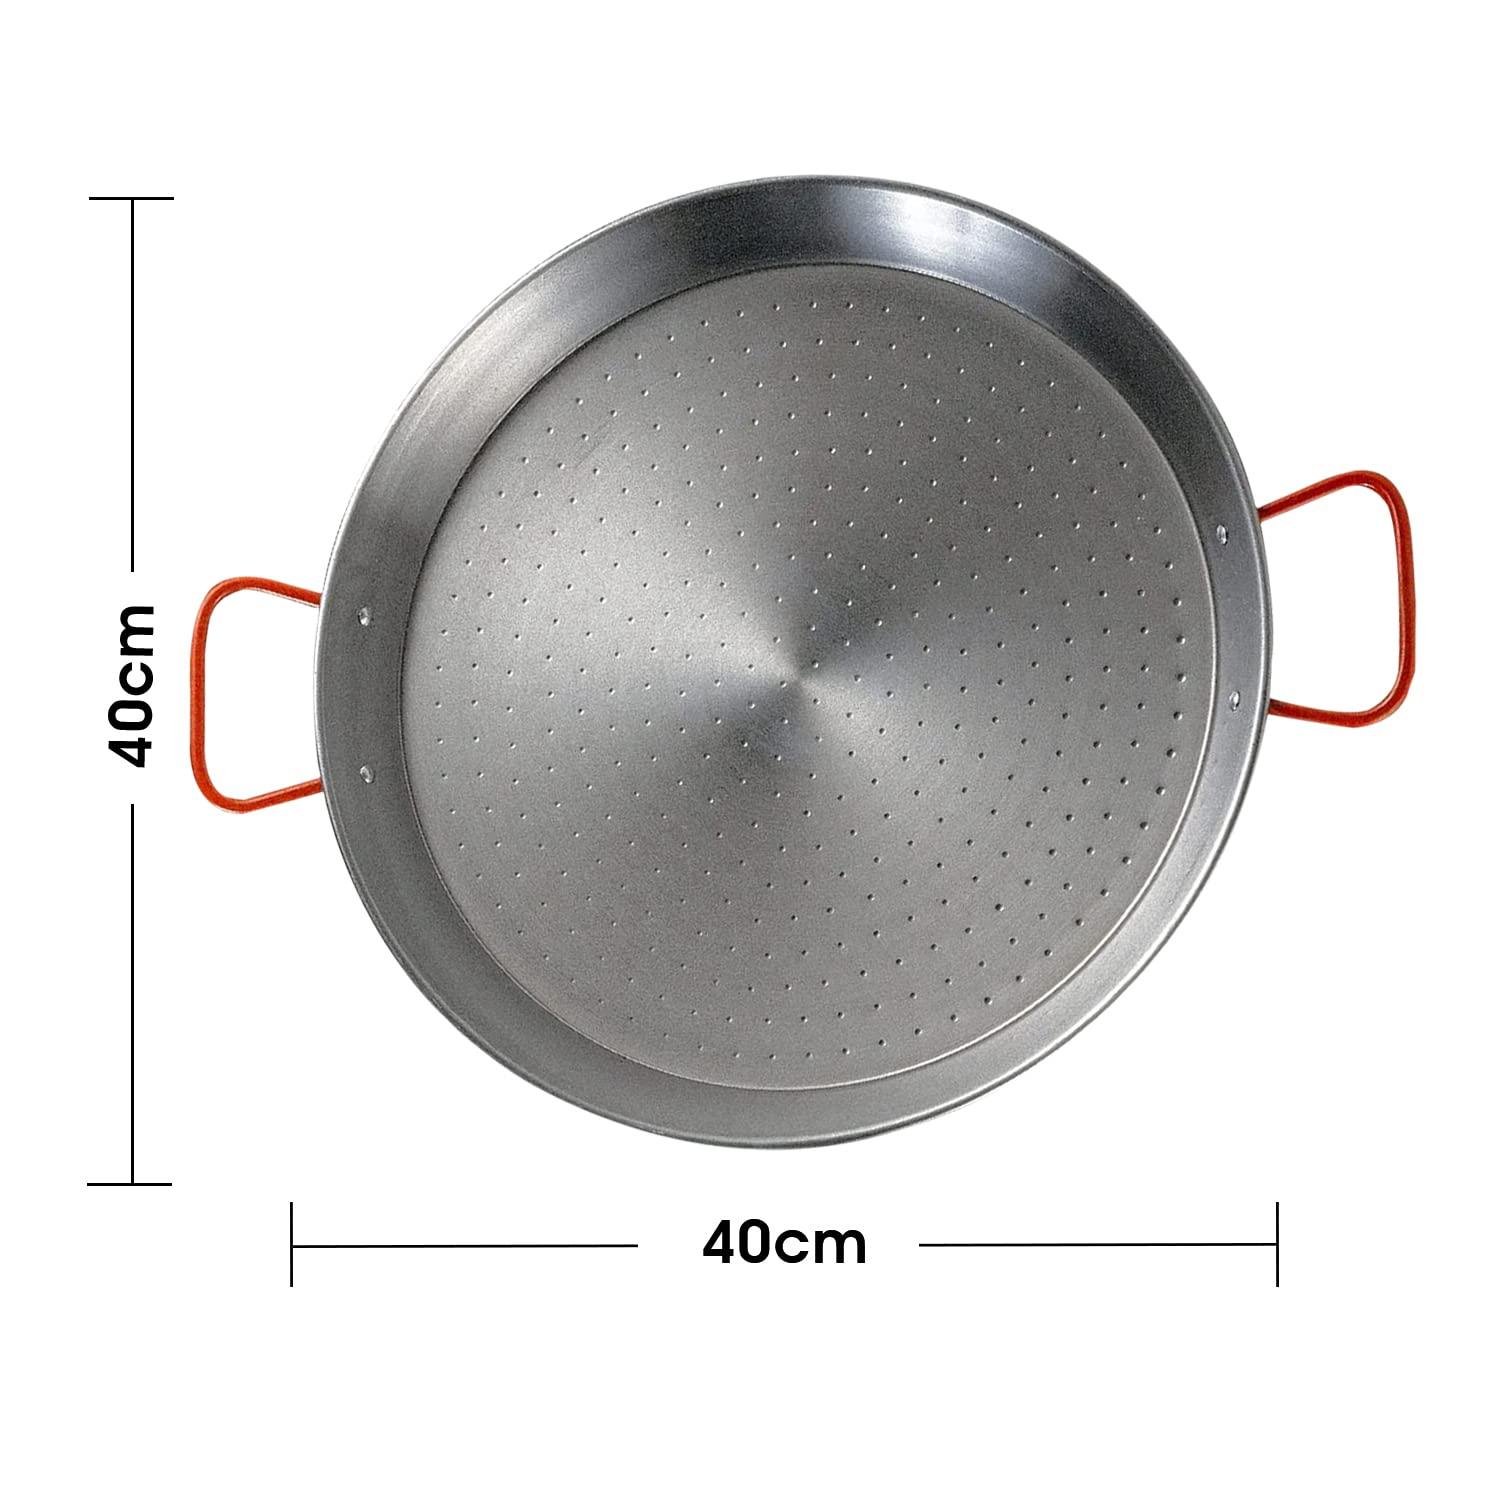 Gourmanity Made By Garcima, 16inch Stainless Steel Paella pan, 40cm Paella Pan Large From Spain, Paella Pan Stainless Steel with Gold Plated Handles, Imported Spanish Paella Dish - CookCave